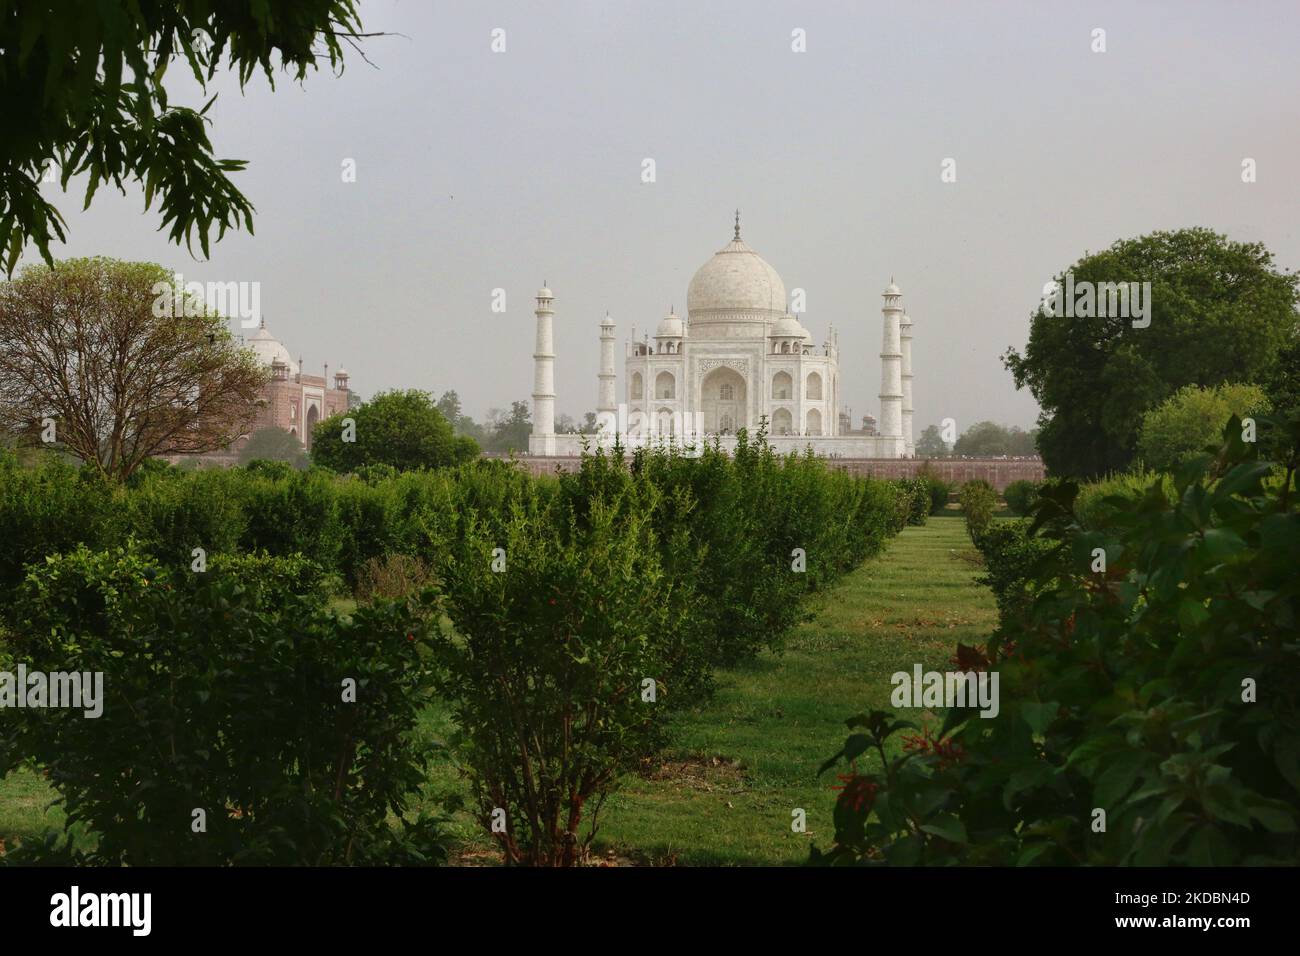 Taj Mahal seen from Mehtab Bagh in Agra, Uttar Pradesh, India, on May 04, 2022. Mehtab Bagh (meaning Moonlight Garden) is a charbagh complex north of the Taj Mahal complex and is perfectly aligned with the Taj Mahal on the opposite bank of the Yamuna River. (Photo by Creative Touch Imaging Ltd./NurPhoto) Stock Photo